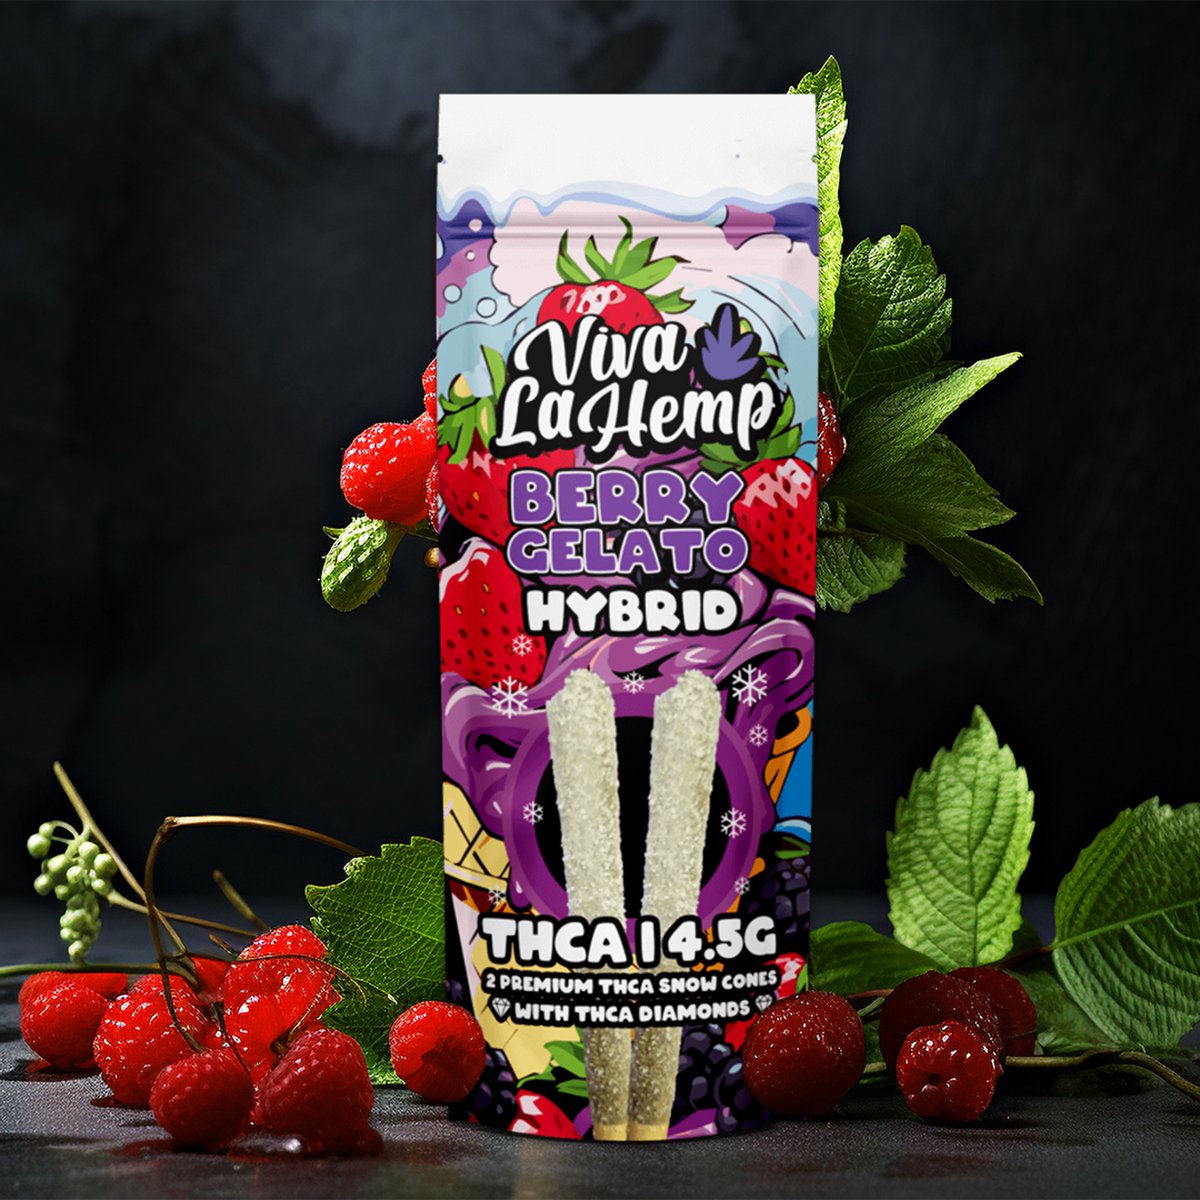 Chill out with our THC-A Snow Cones - a frosty treat for your senses. Embrace the cool vibes and elevate your summer experience. Dive into relaxation with every icy bite. ❄🍧

#vivalahemp #vivalaglobal #THCA #SnowCones #SummerChill #ChillVibes #ElevateYourExperience